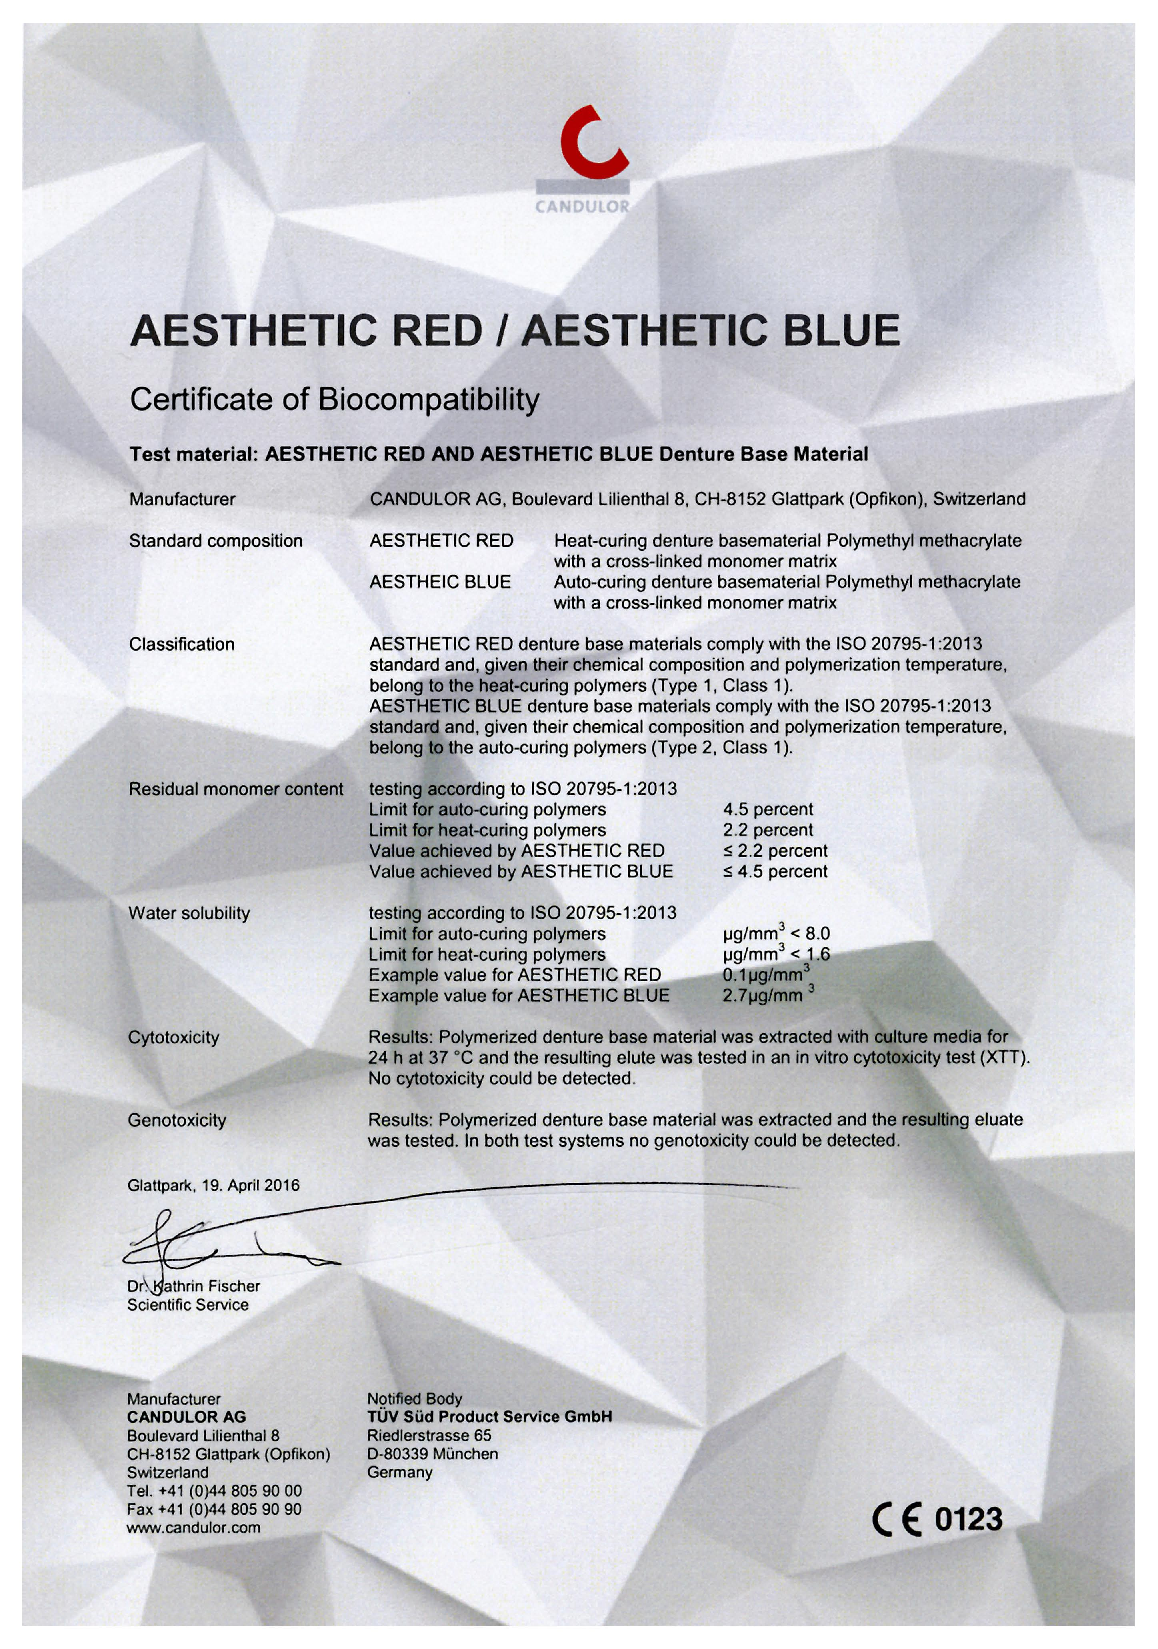 AESTHETIC RED and AESTHETIC BLUE Certificate of Biocompatibility